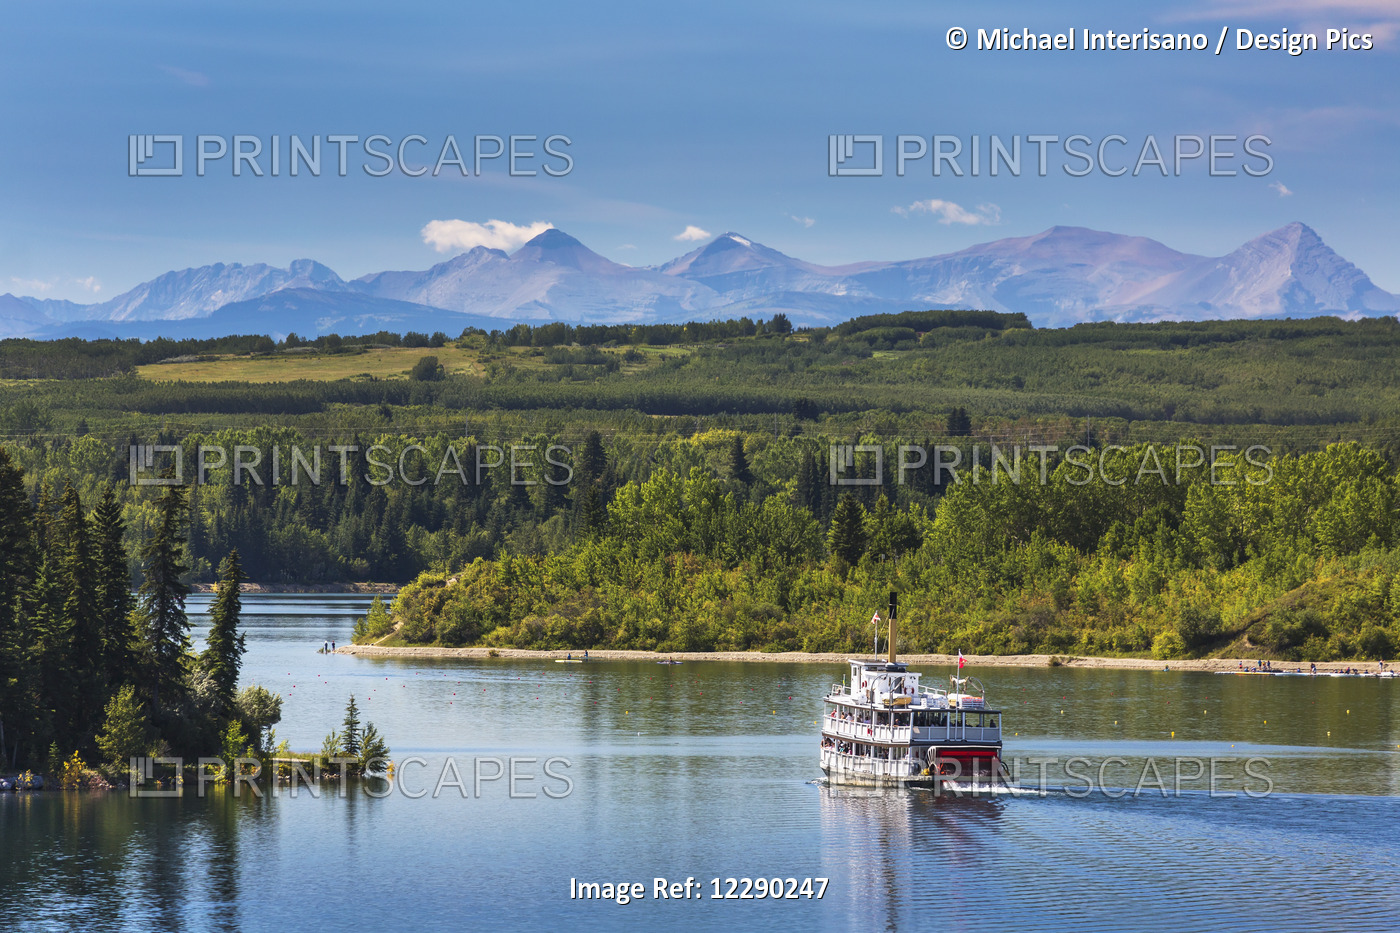 Paddlewheel Boat On Lake With Tree Lined Shoreline, Hills And Mountains In The ...